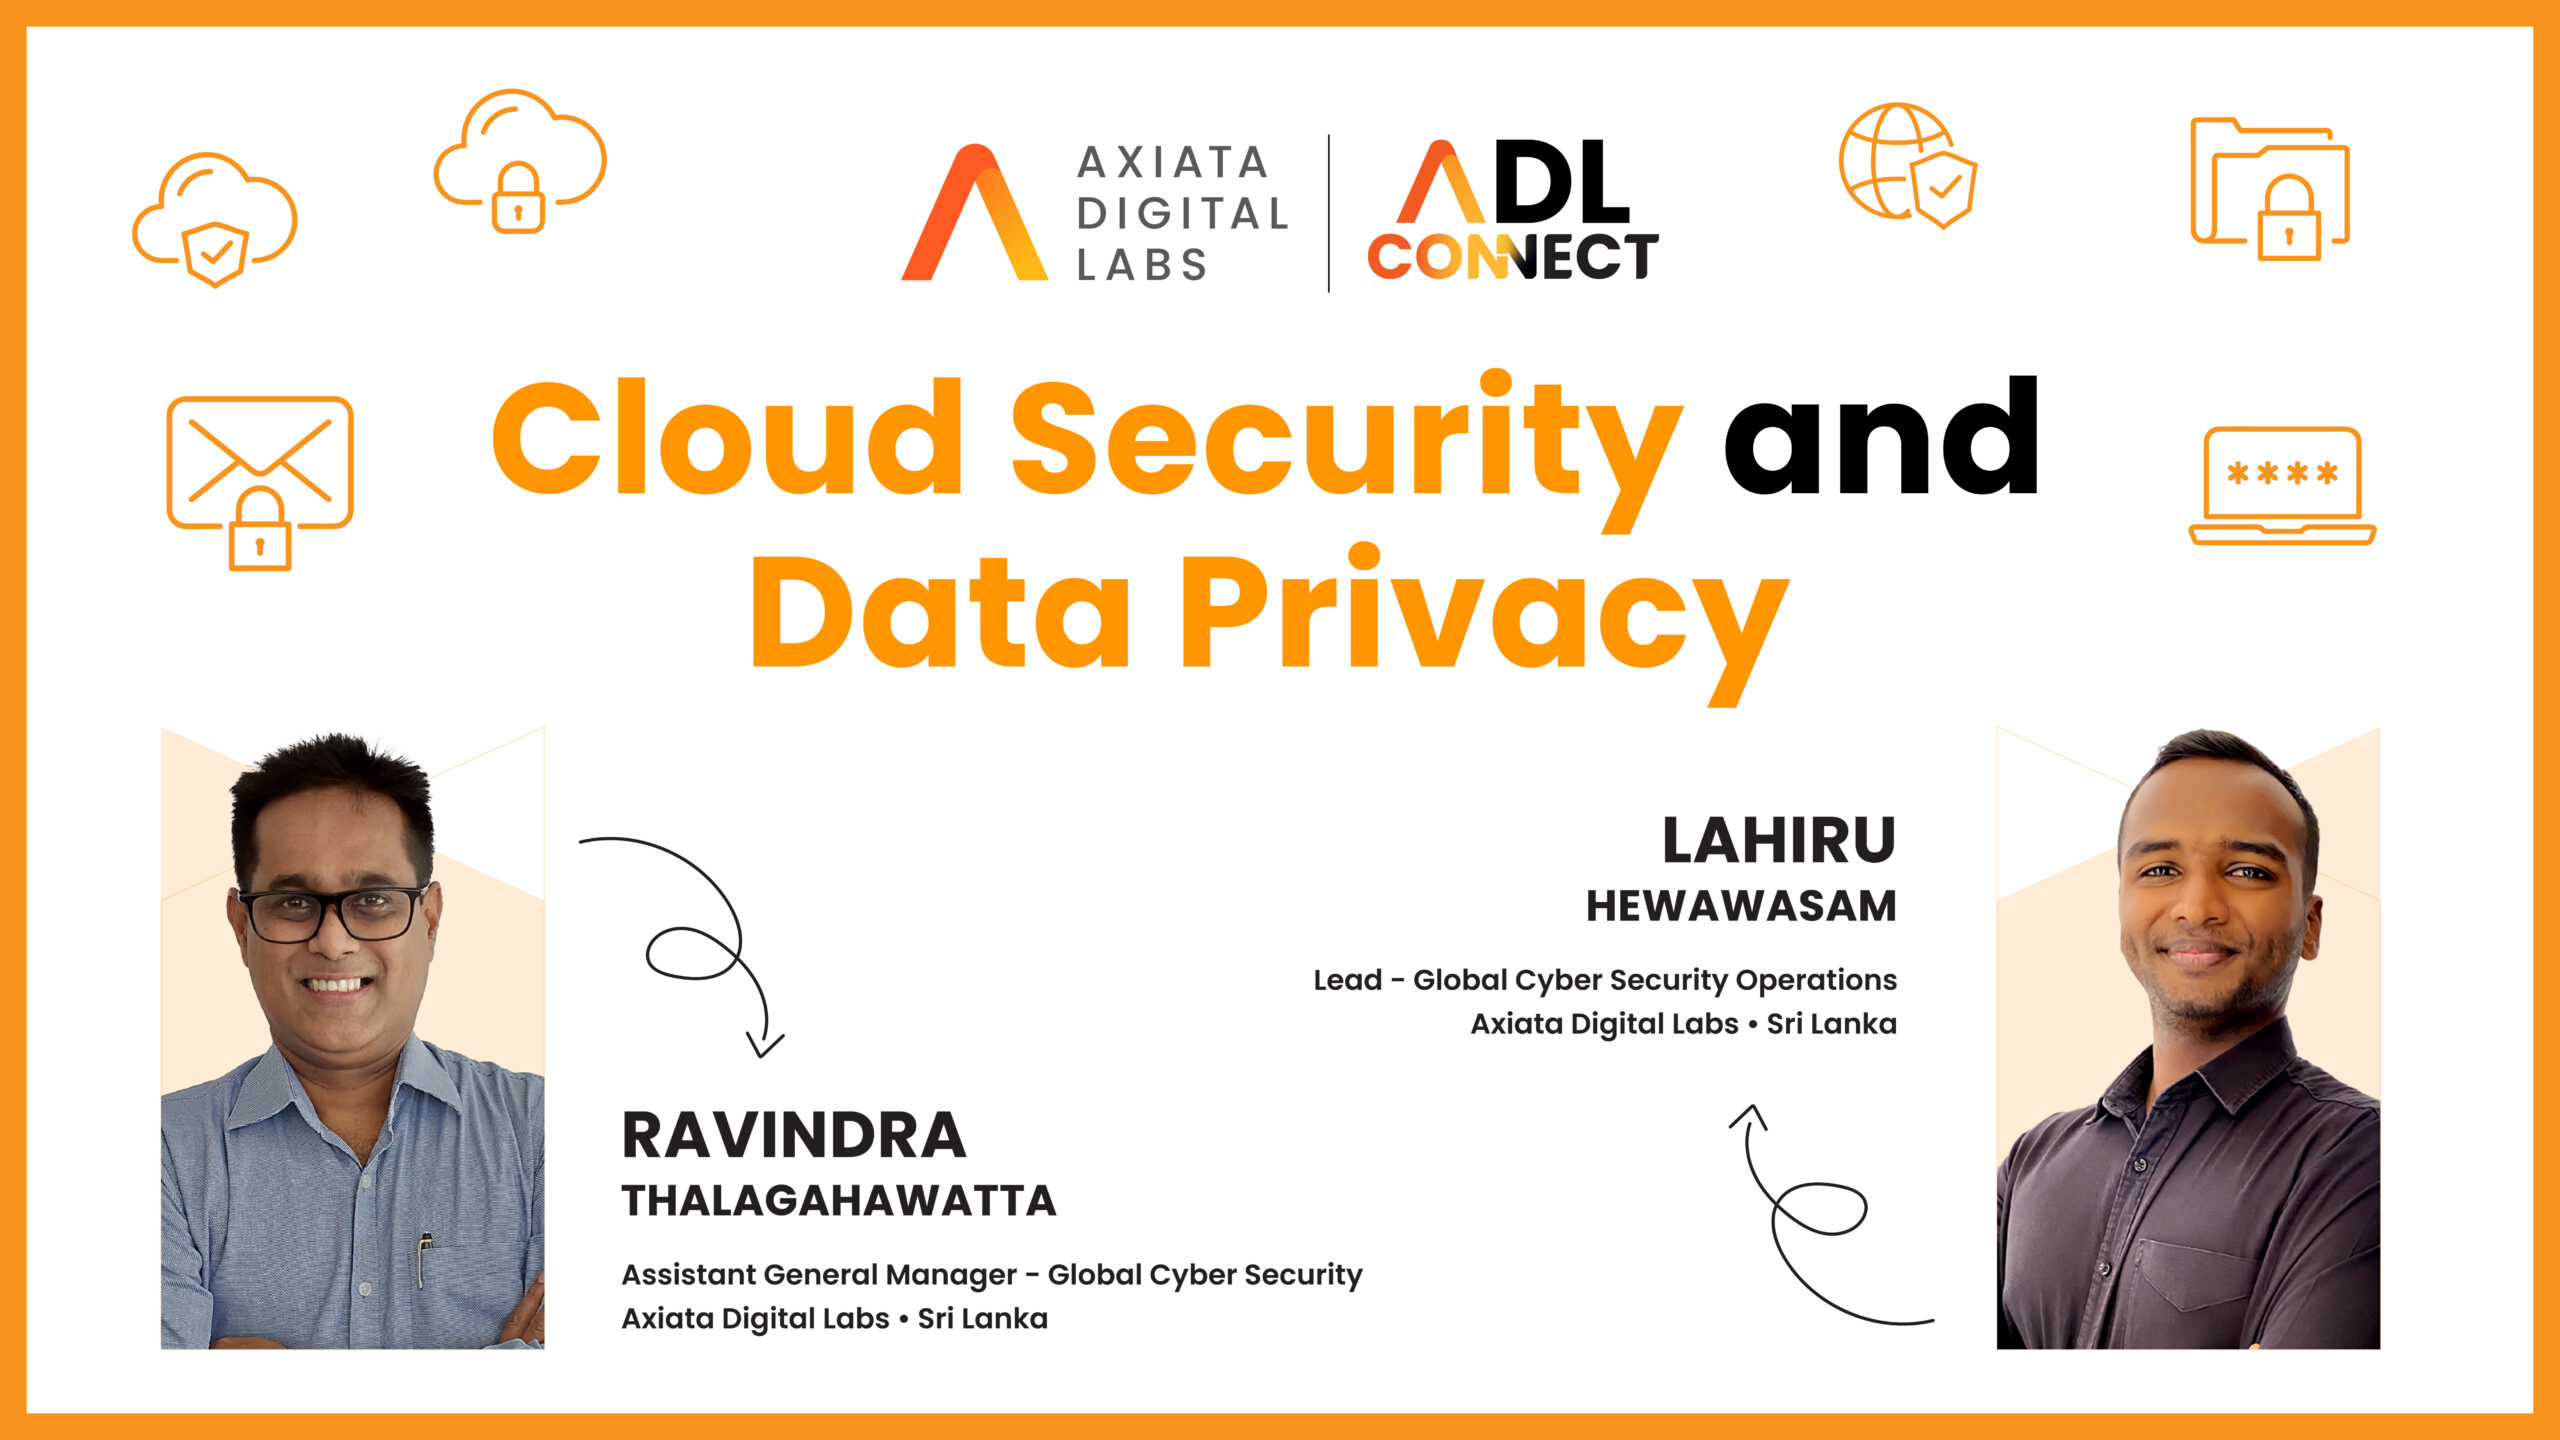 Cloud Security and Data Privacy